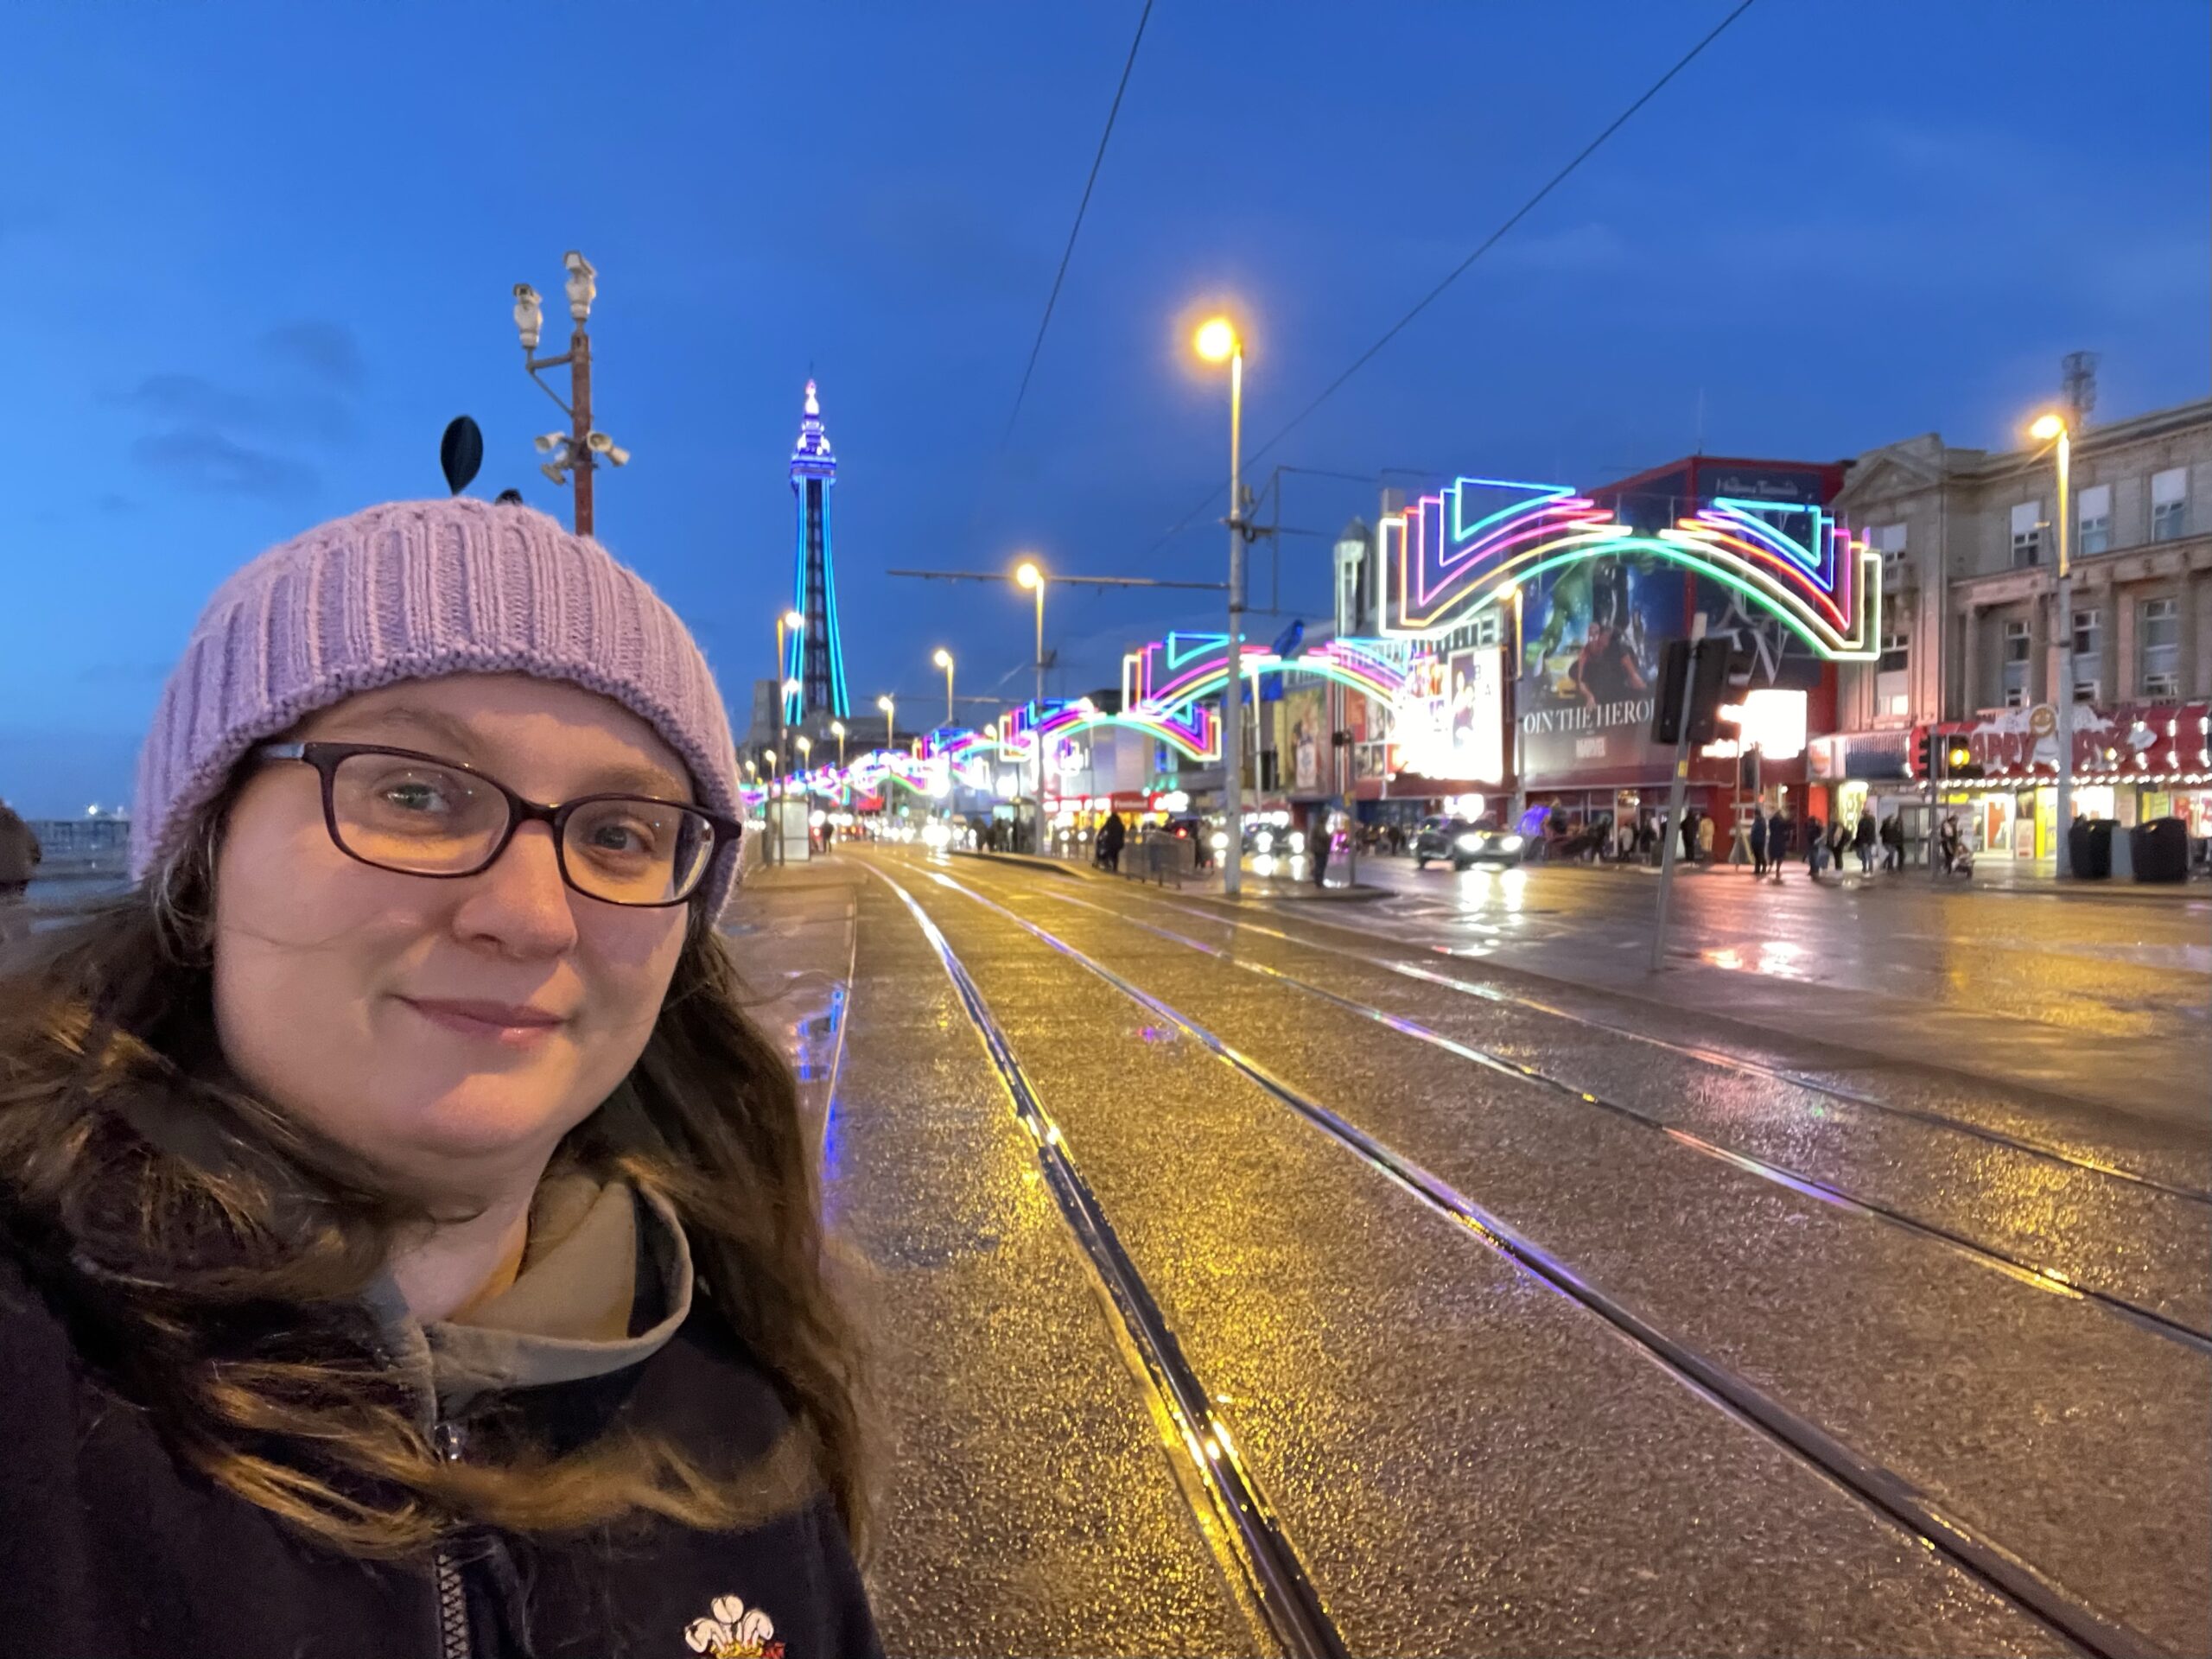 Selfie of Rebecca with Blackpool Tower and lights in the background